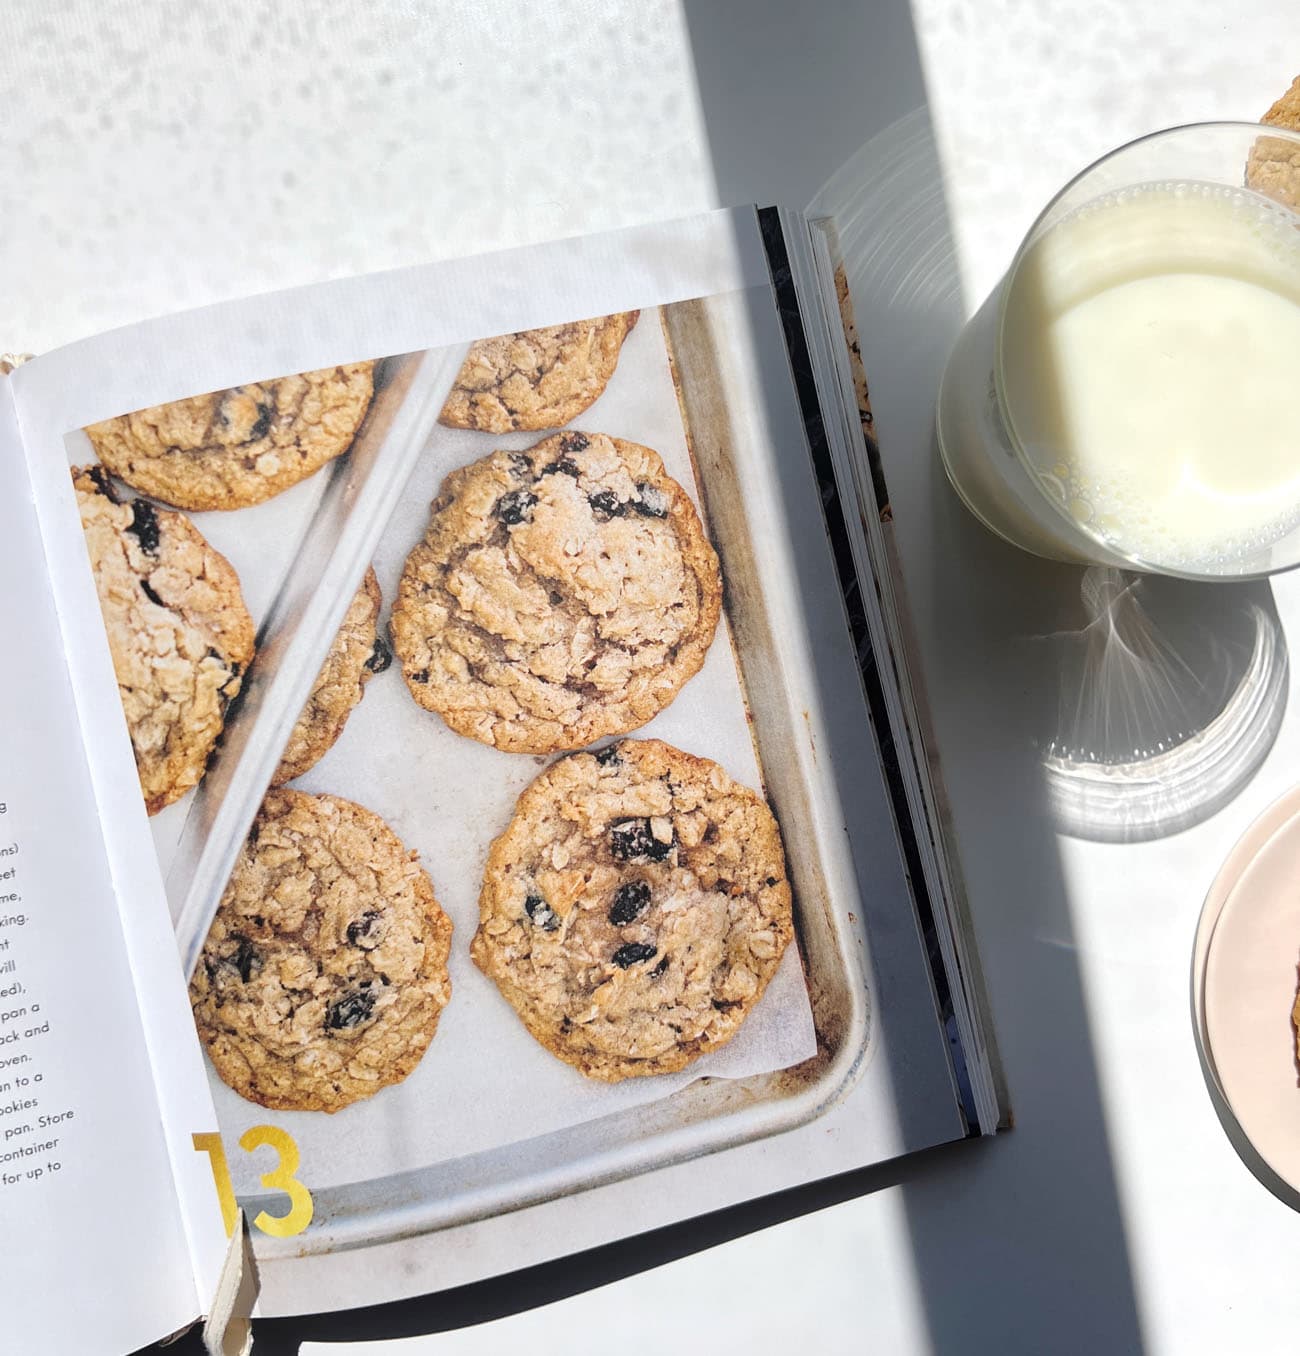 100 cookies cookbook with a glass of milk to its right